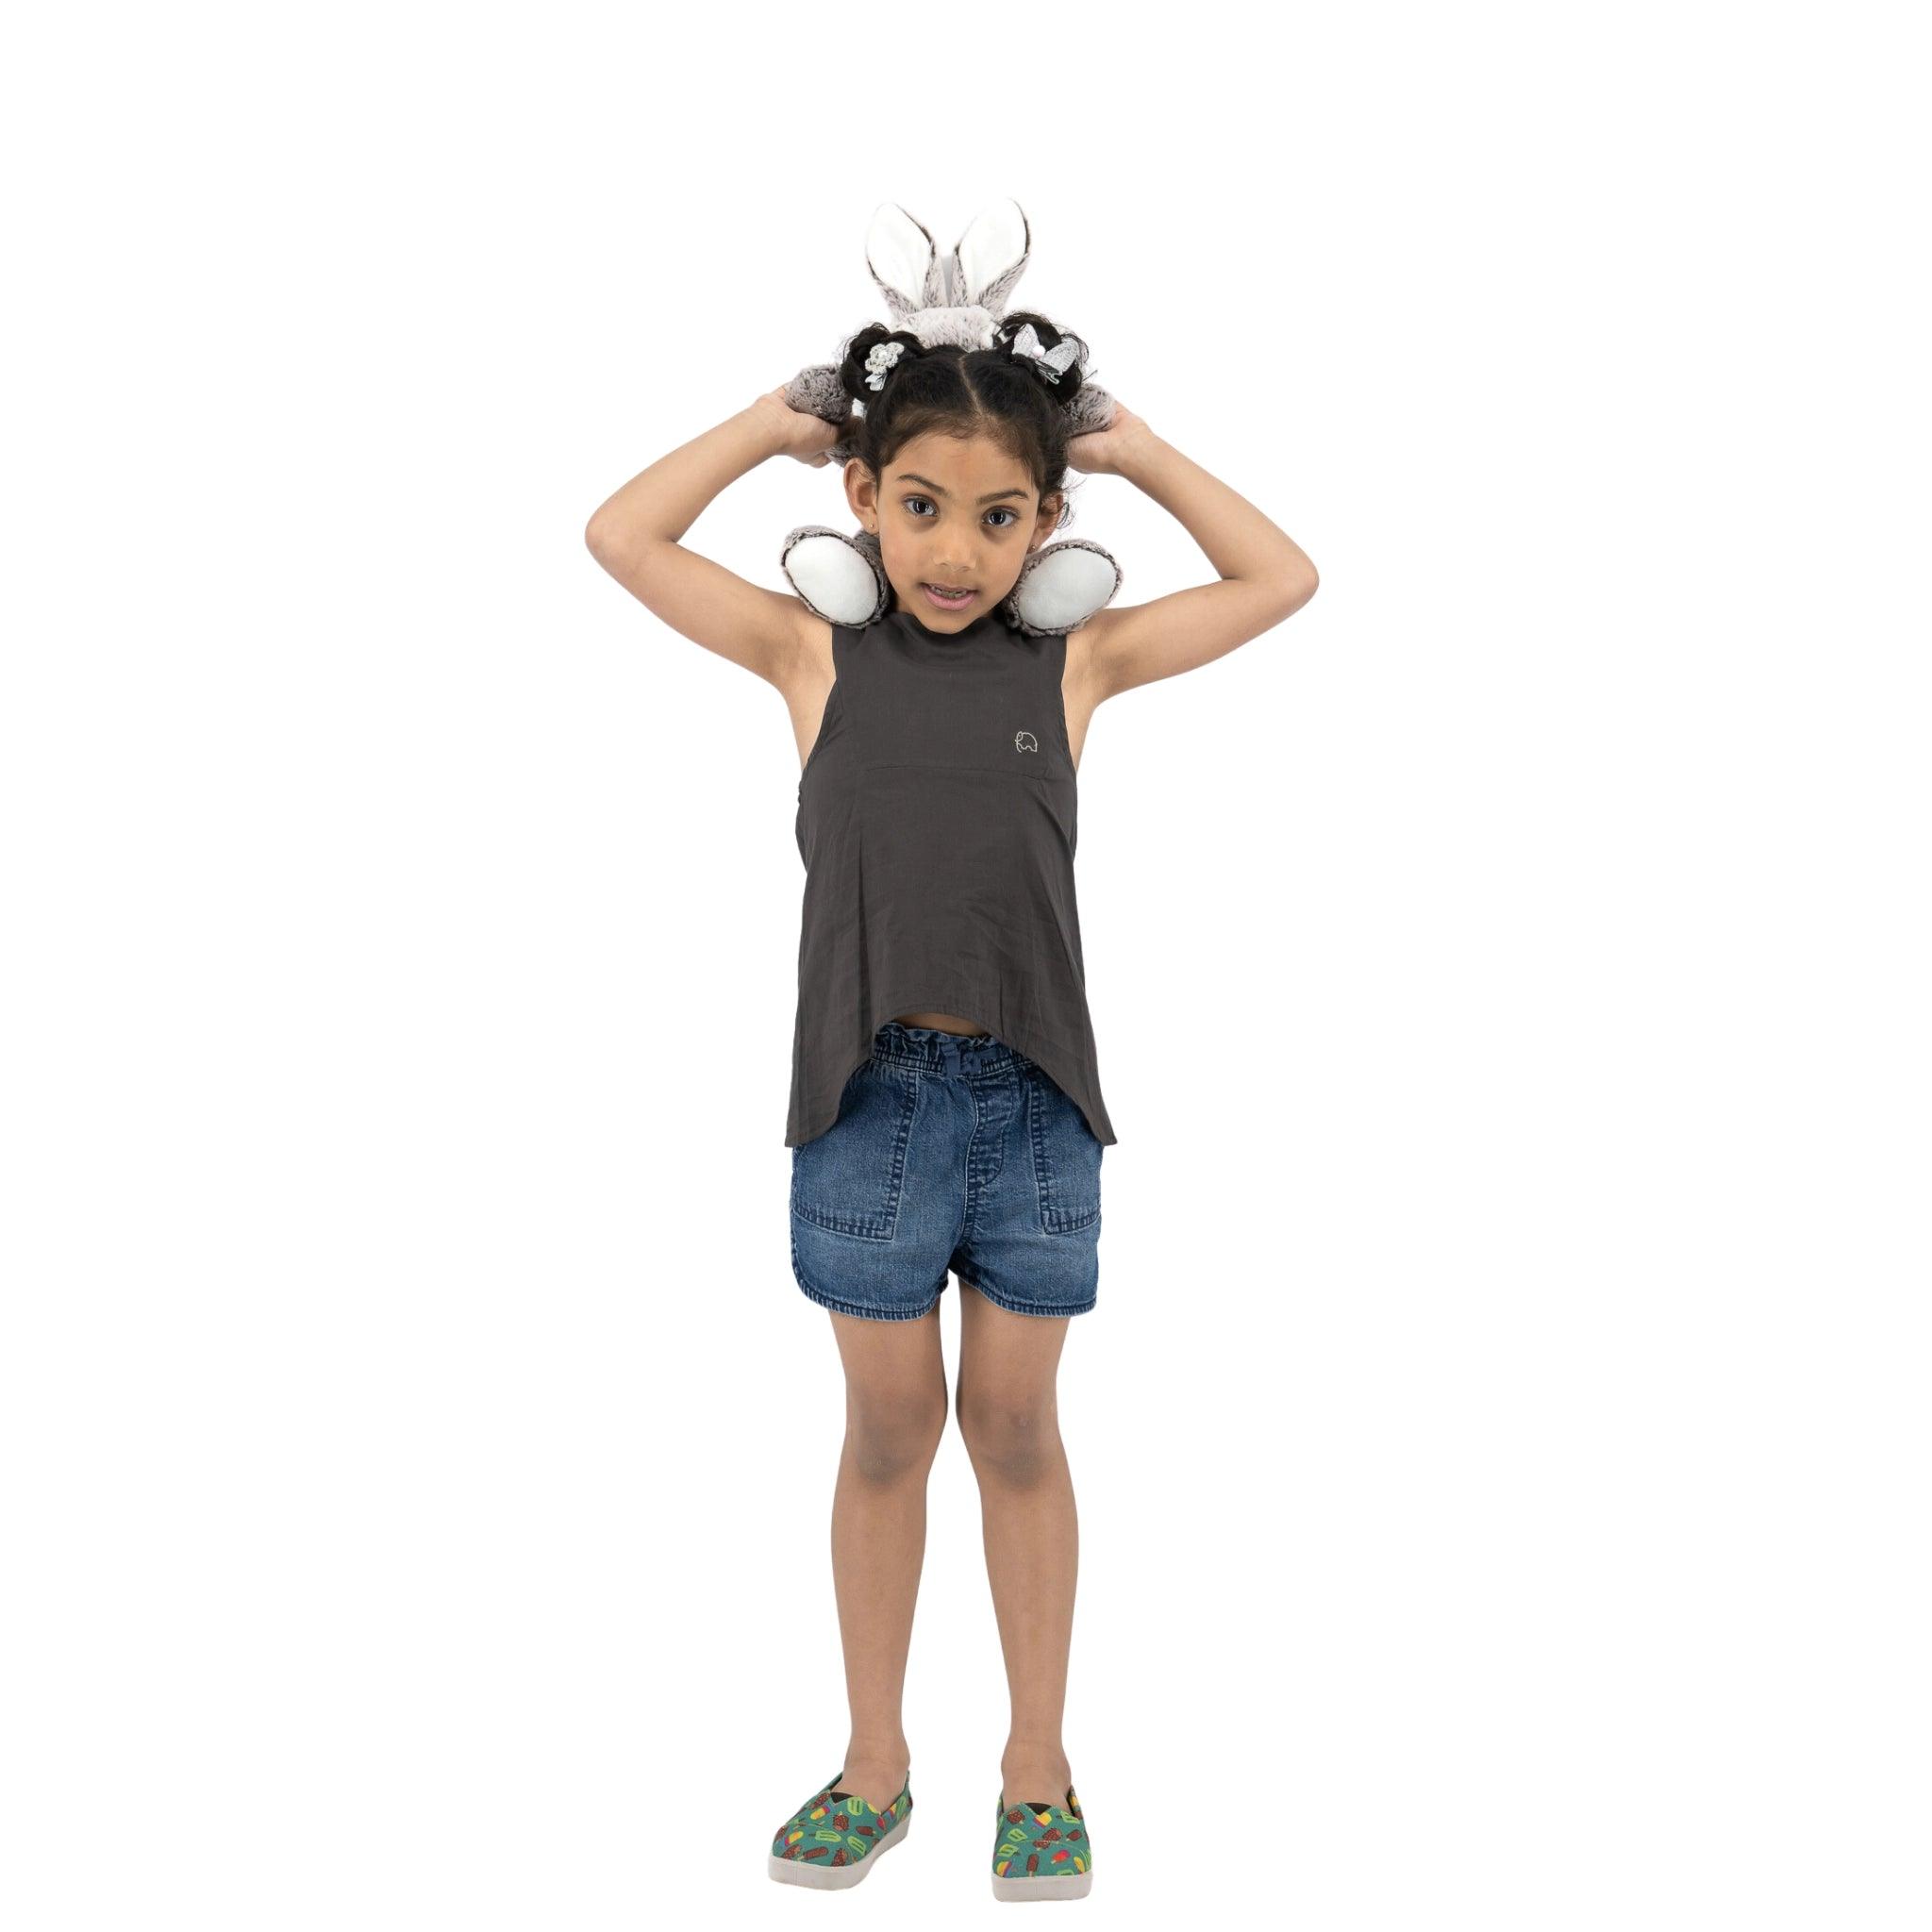 A young girl wearing a Plum Kitten Cotton Bib Neck Top for Kids by Karee, denim shorts, and colorful shoes stands holding butterfly wings on her head, looking at the camera with a playful expression.